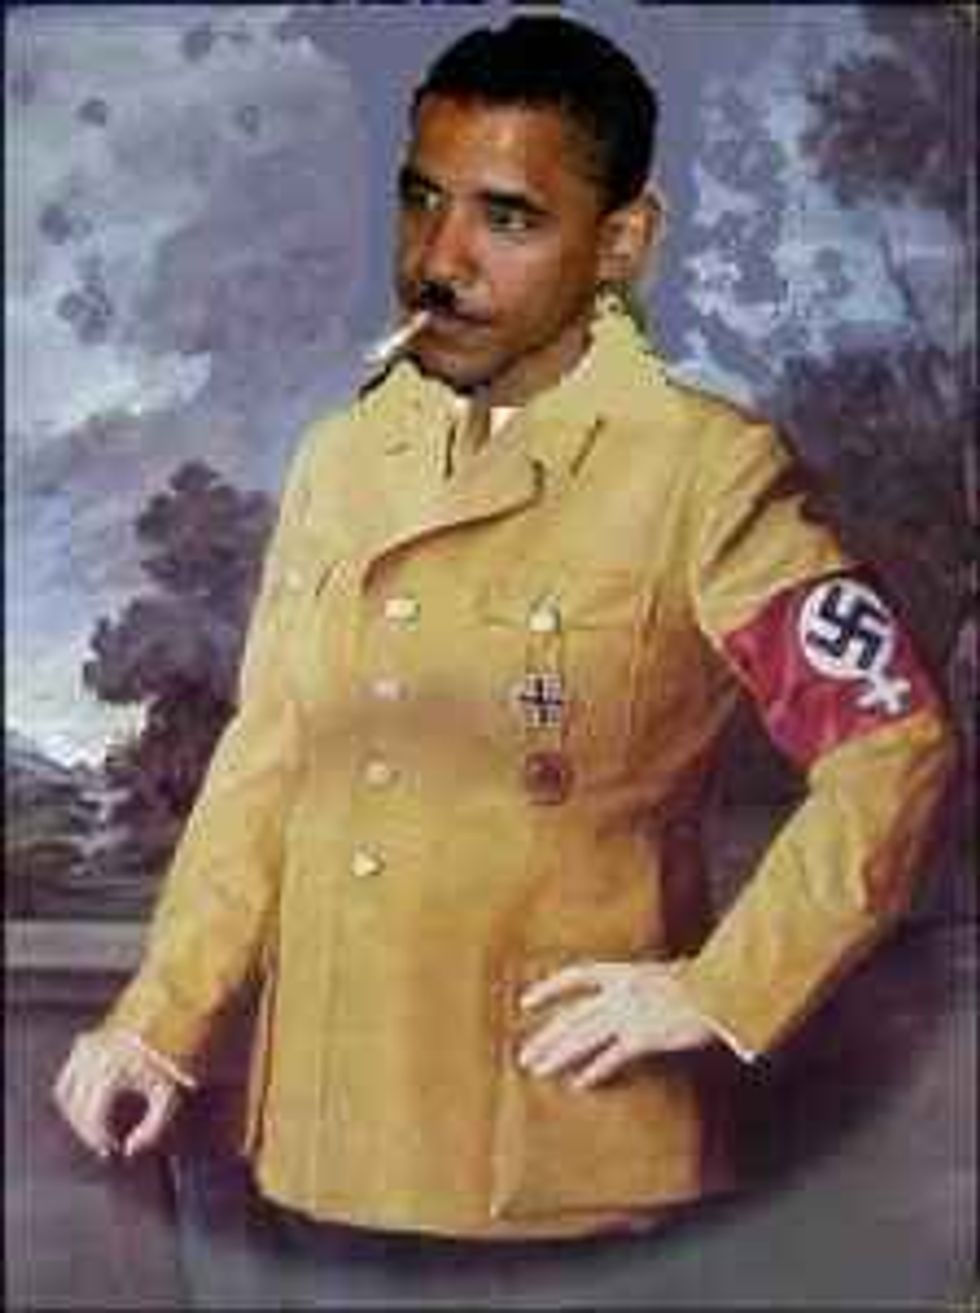 Hitler Obama Deports Religious Home-Schoolers To Germany, Even Though They Are Not Even Mexican